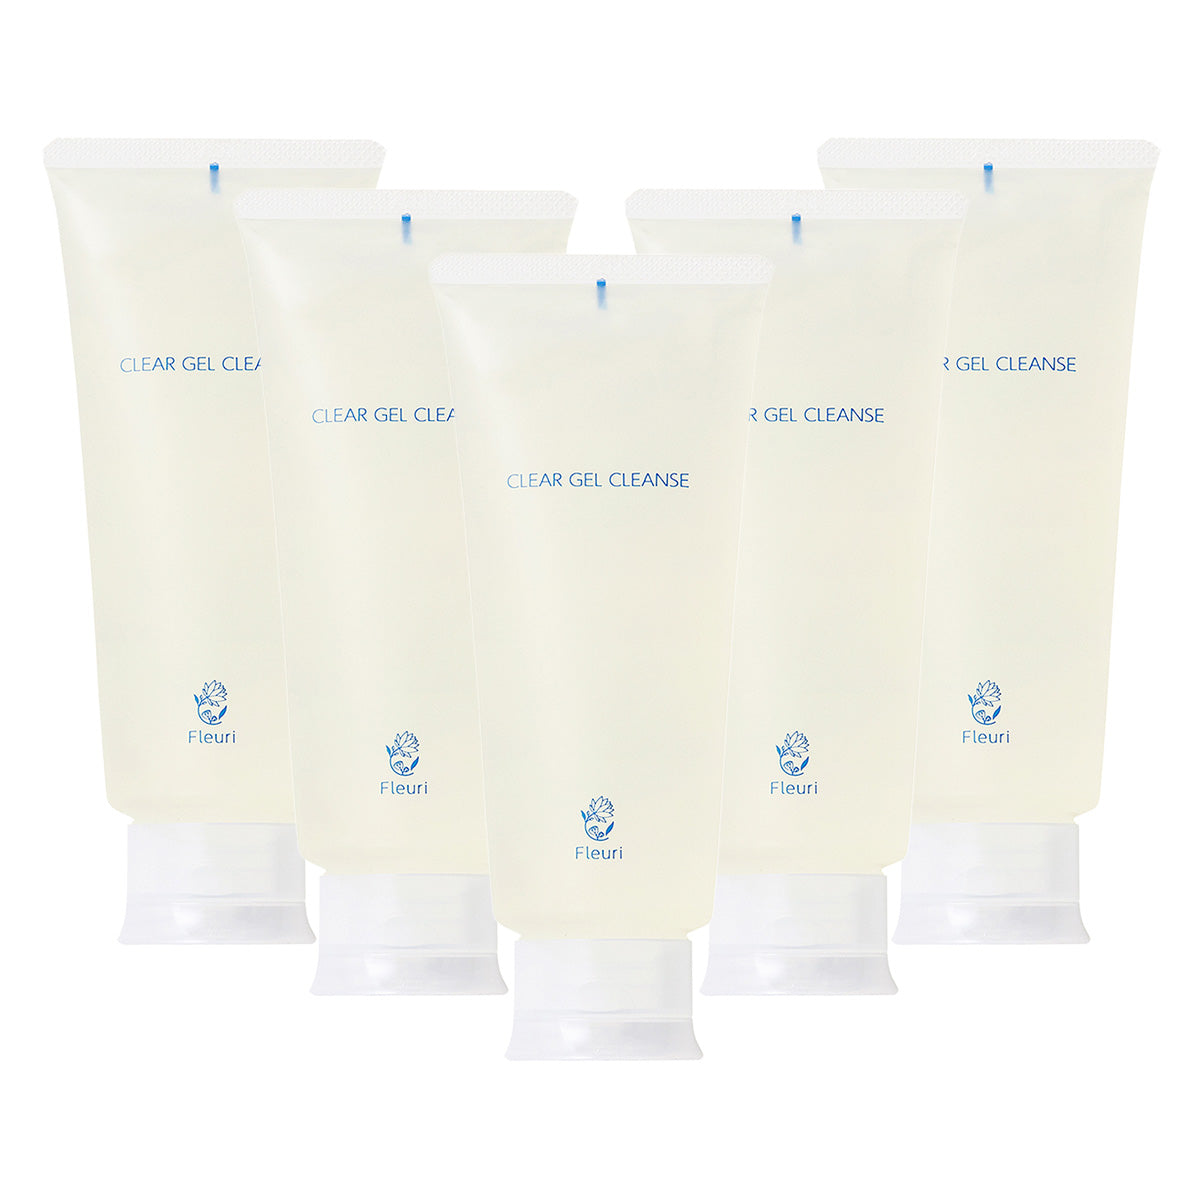 CLEAR GEL CLEANSE (5PCS) -Gentle Makeup Remover-